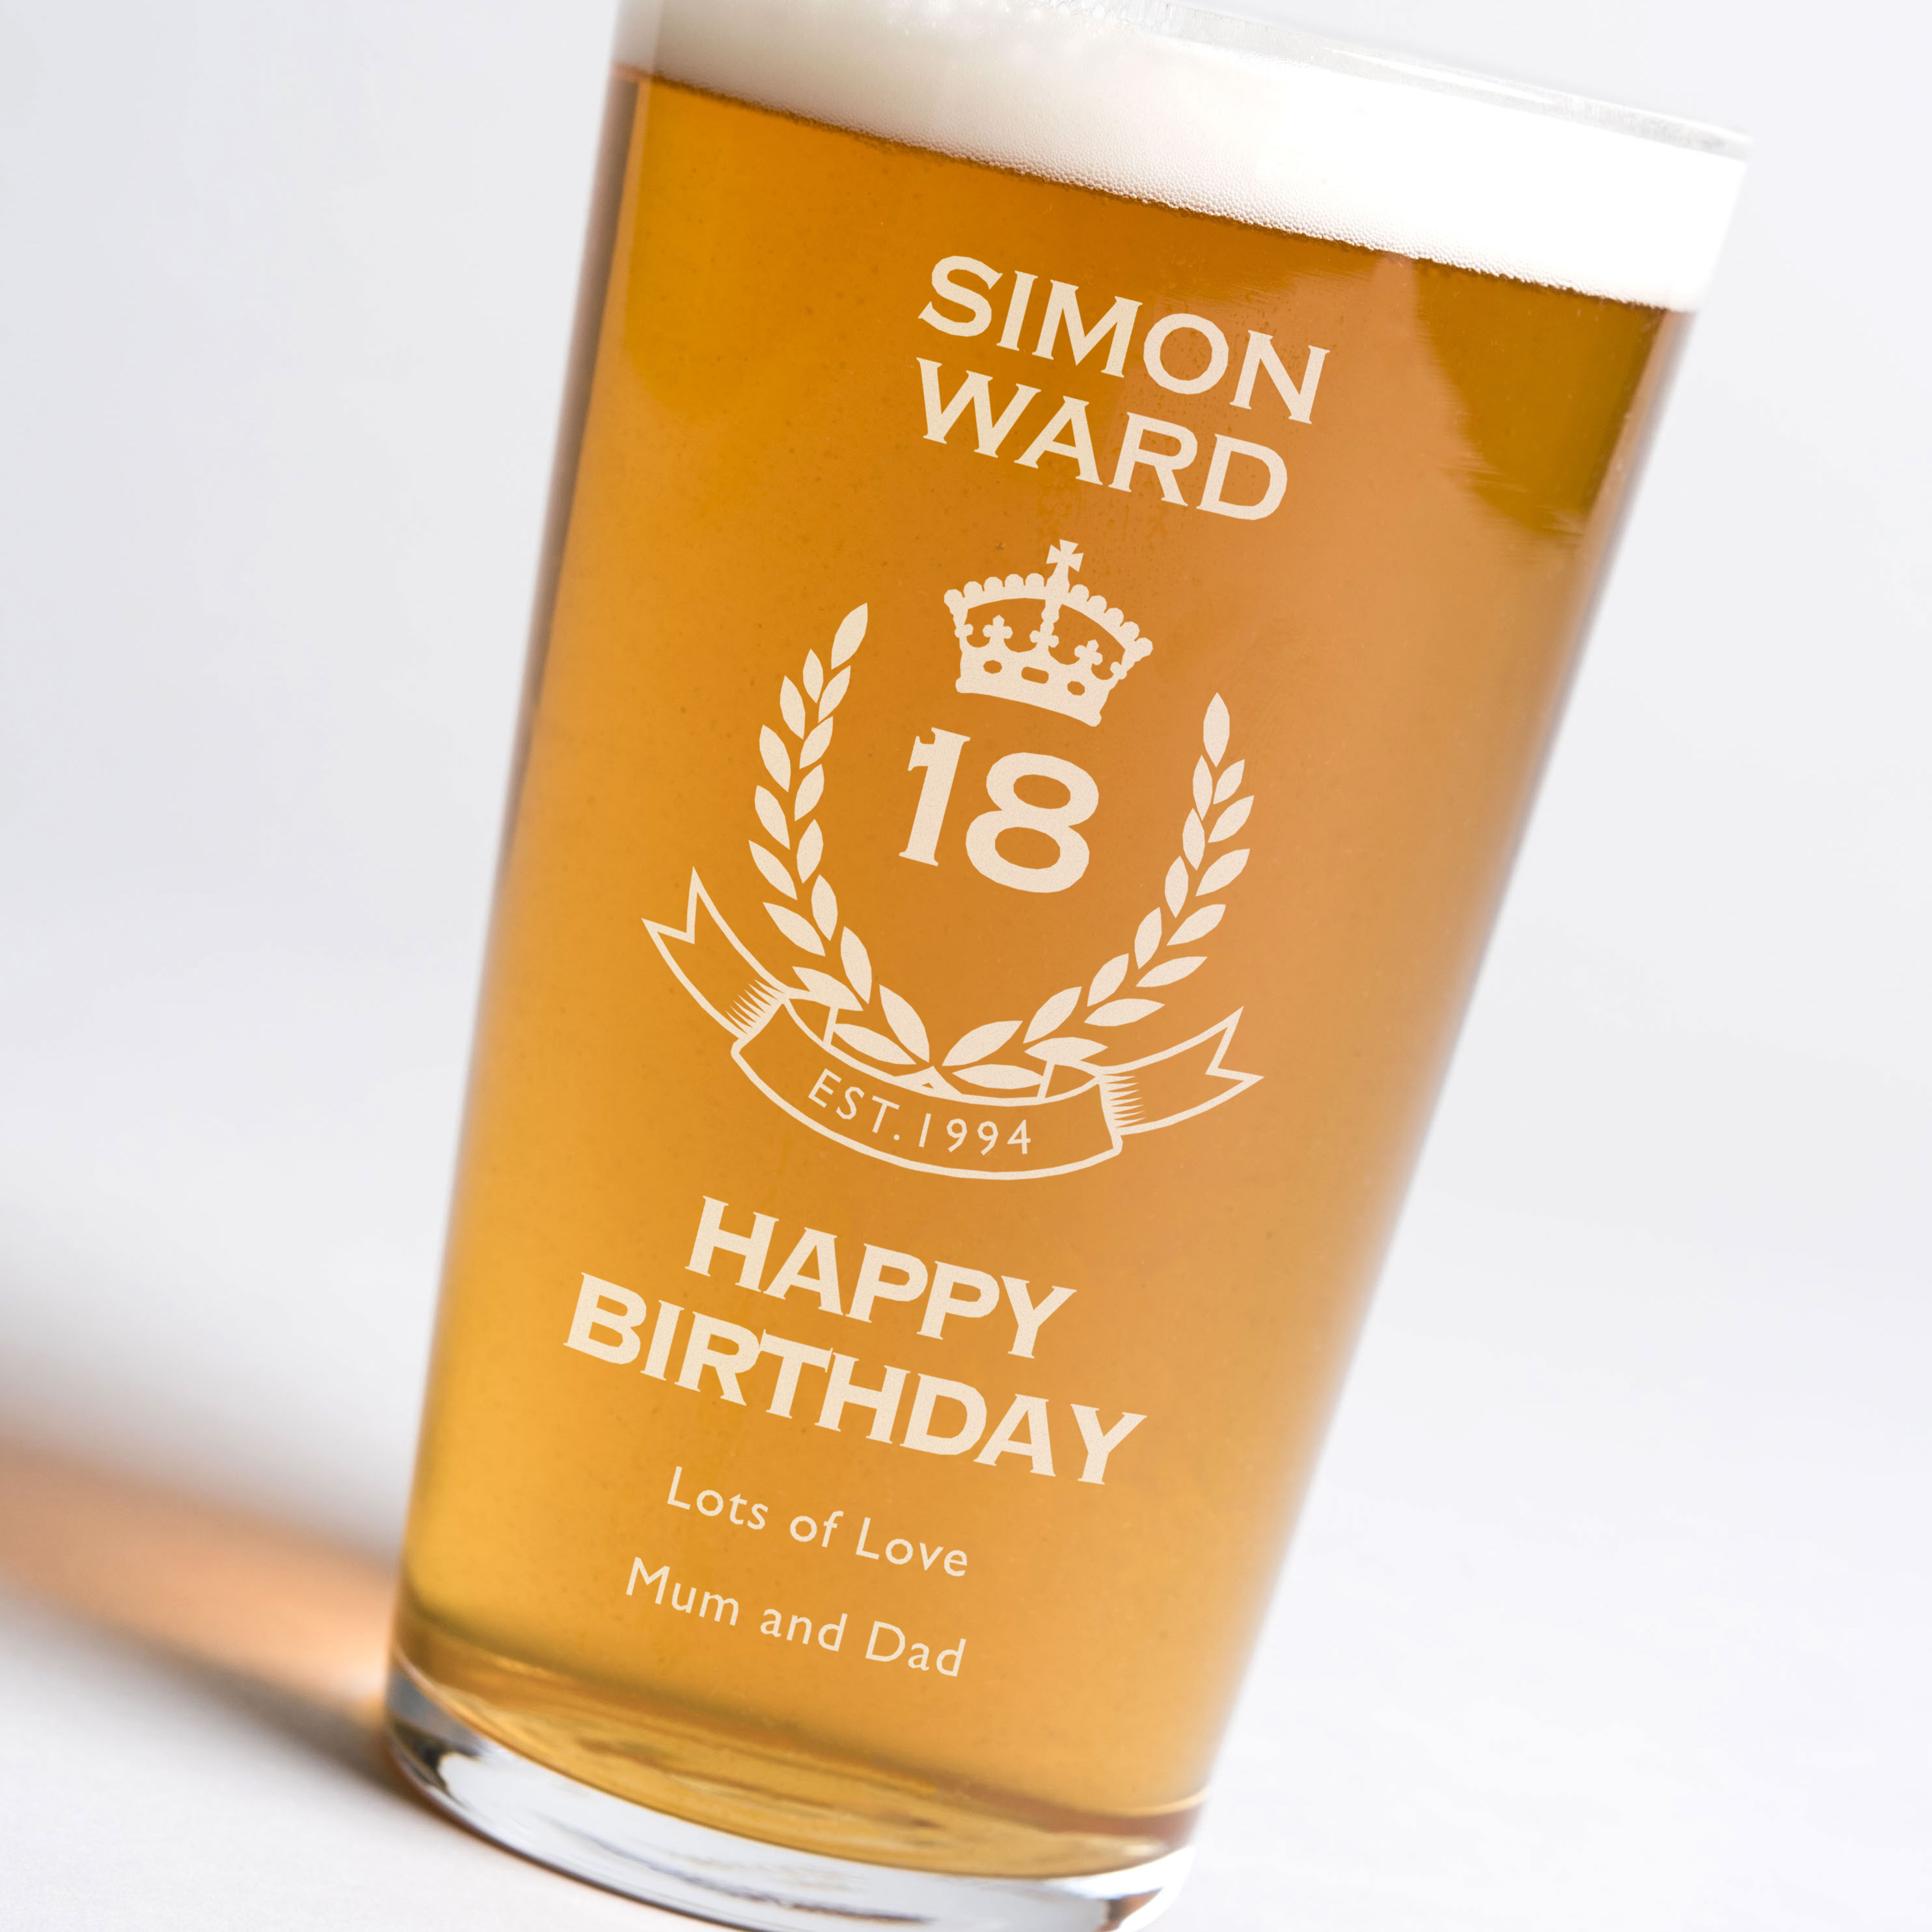 Personalised Pint Glass - 18th Birthday Crest